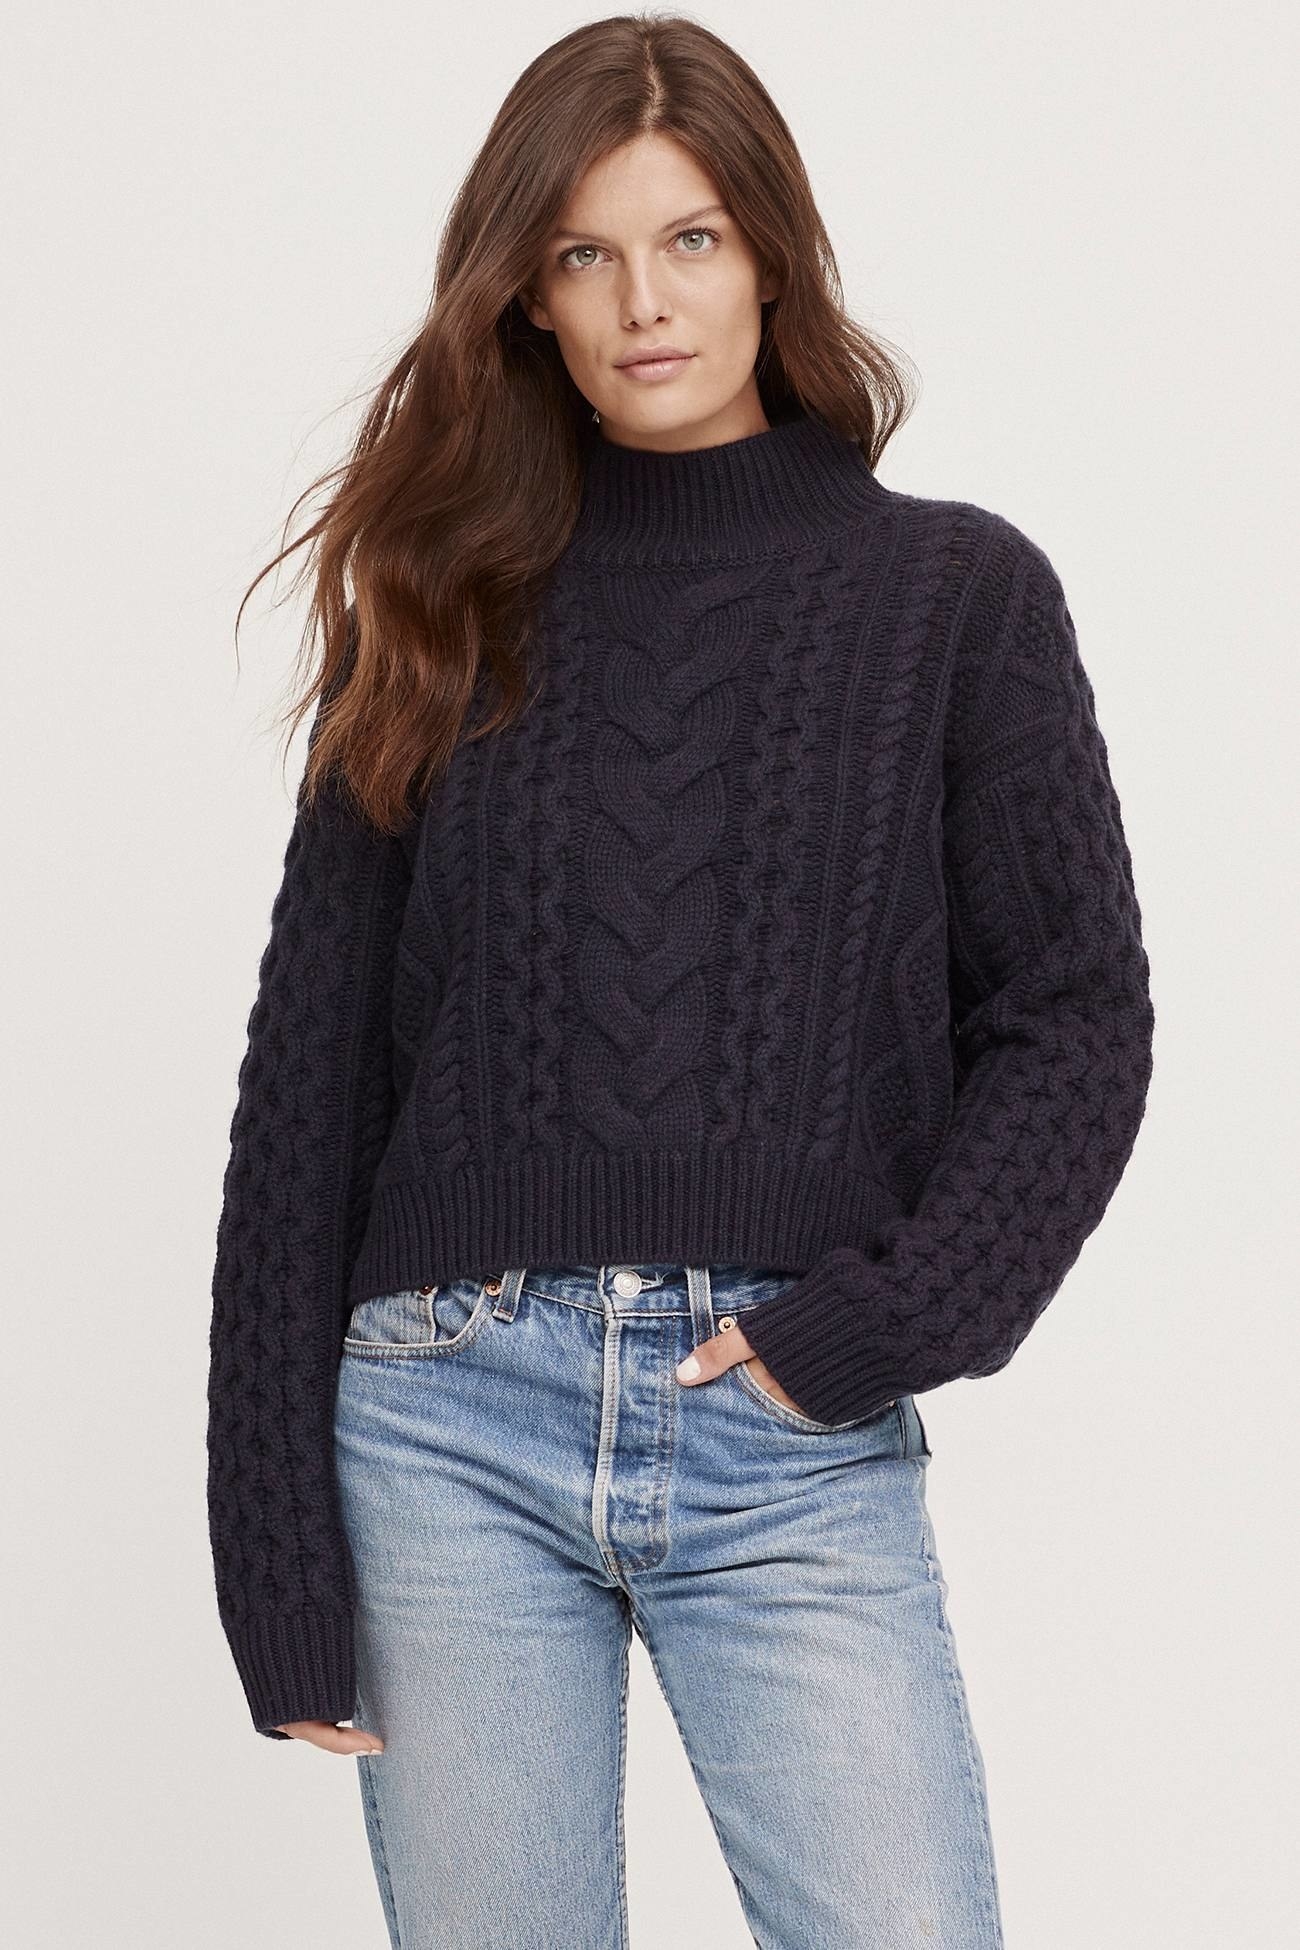 model wearing the cropped cable-knit sweater in navy